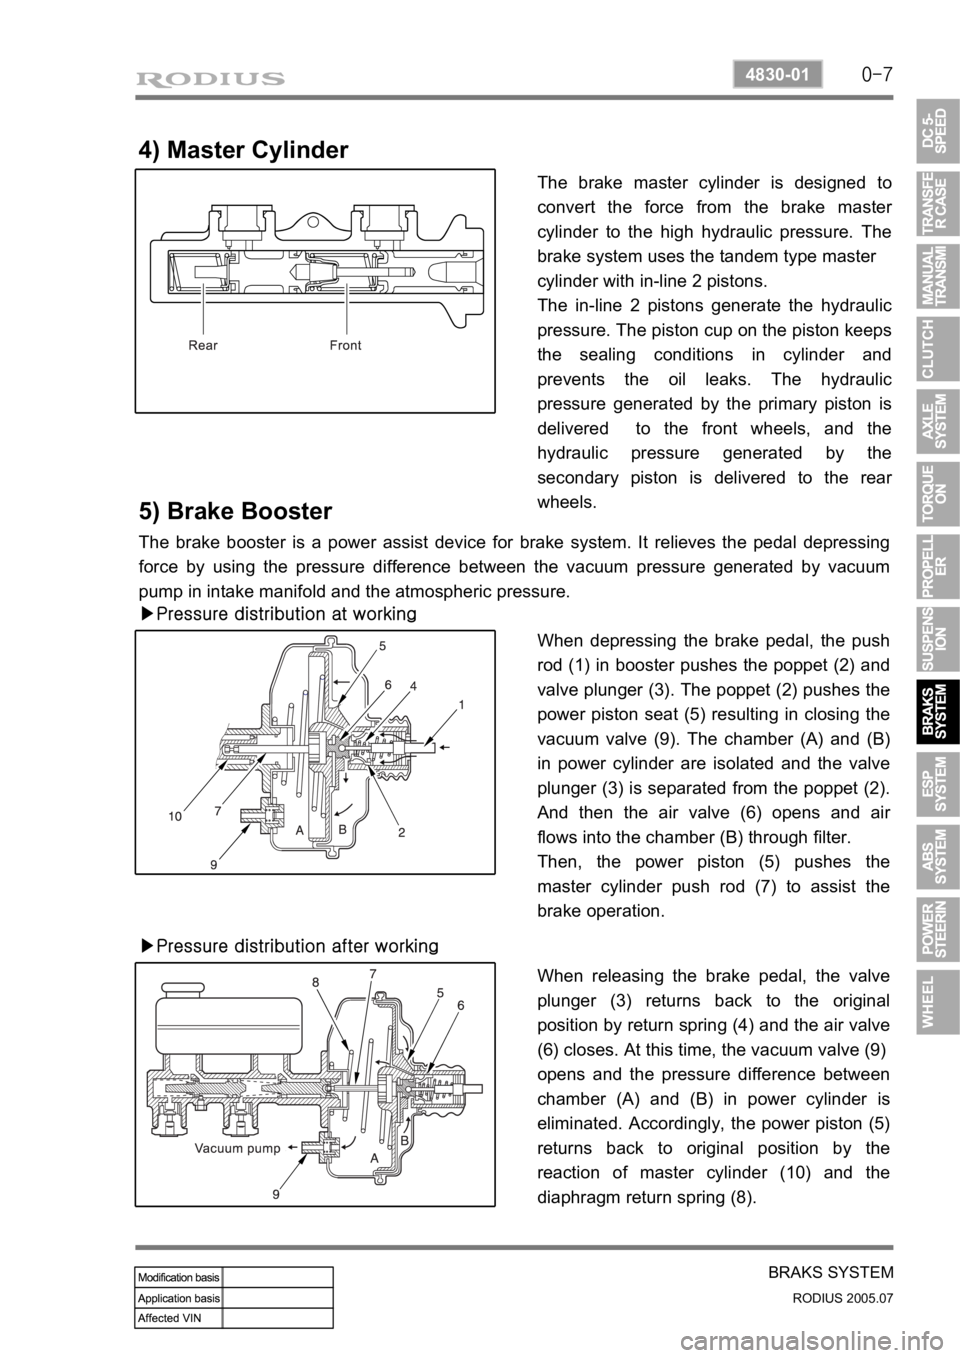 SSANGYONG RODIUS 2005  Service Manual 0-7
BRAKS SYSTEM
RODIUS 2005.07
4830-01
4) Master Cylinder
The brake master cylinder is designed to 
convert the force from the brake maste
r 
cylinder to the high hydraulic pressure. The 
brake syste